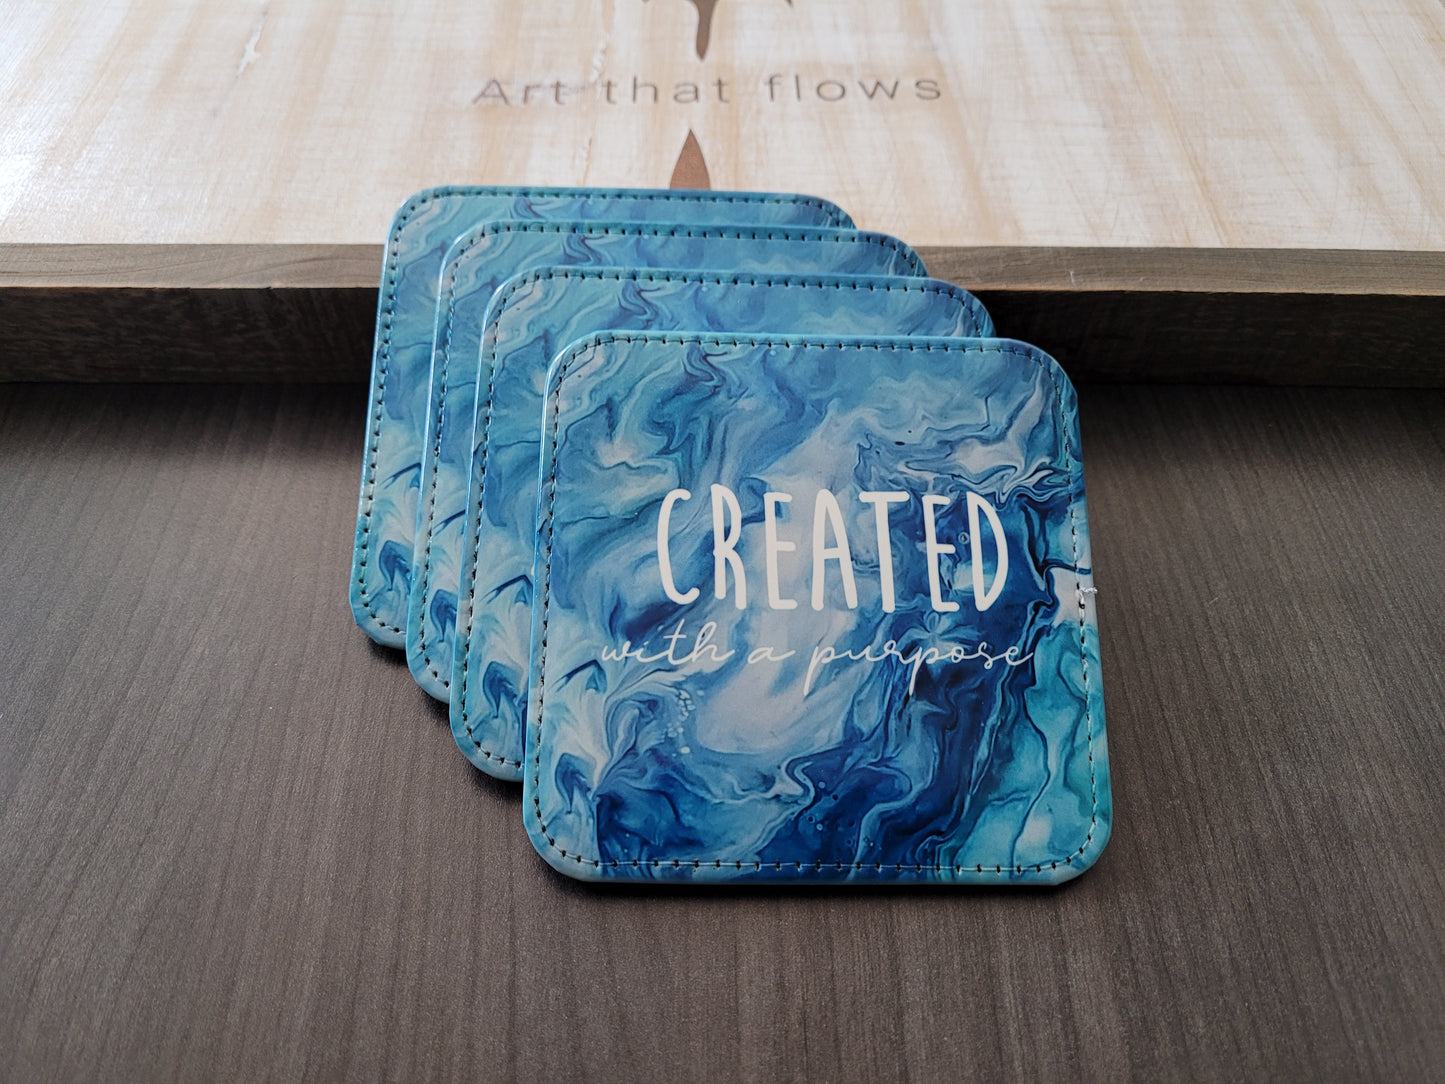 Created with a Purpose Blue and Teal Acrylic Pour Abstract Art Faux Leather Coaster Set